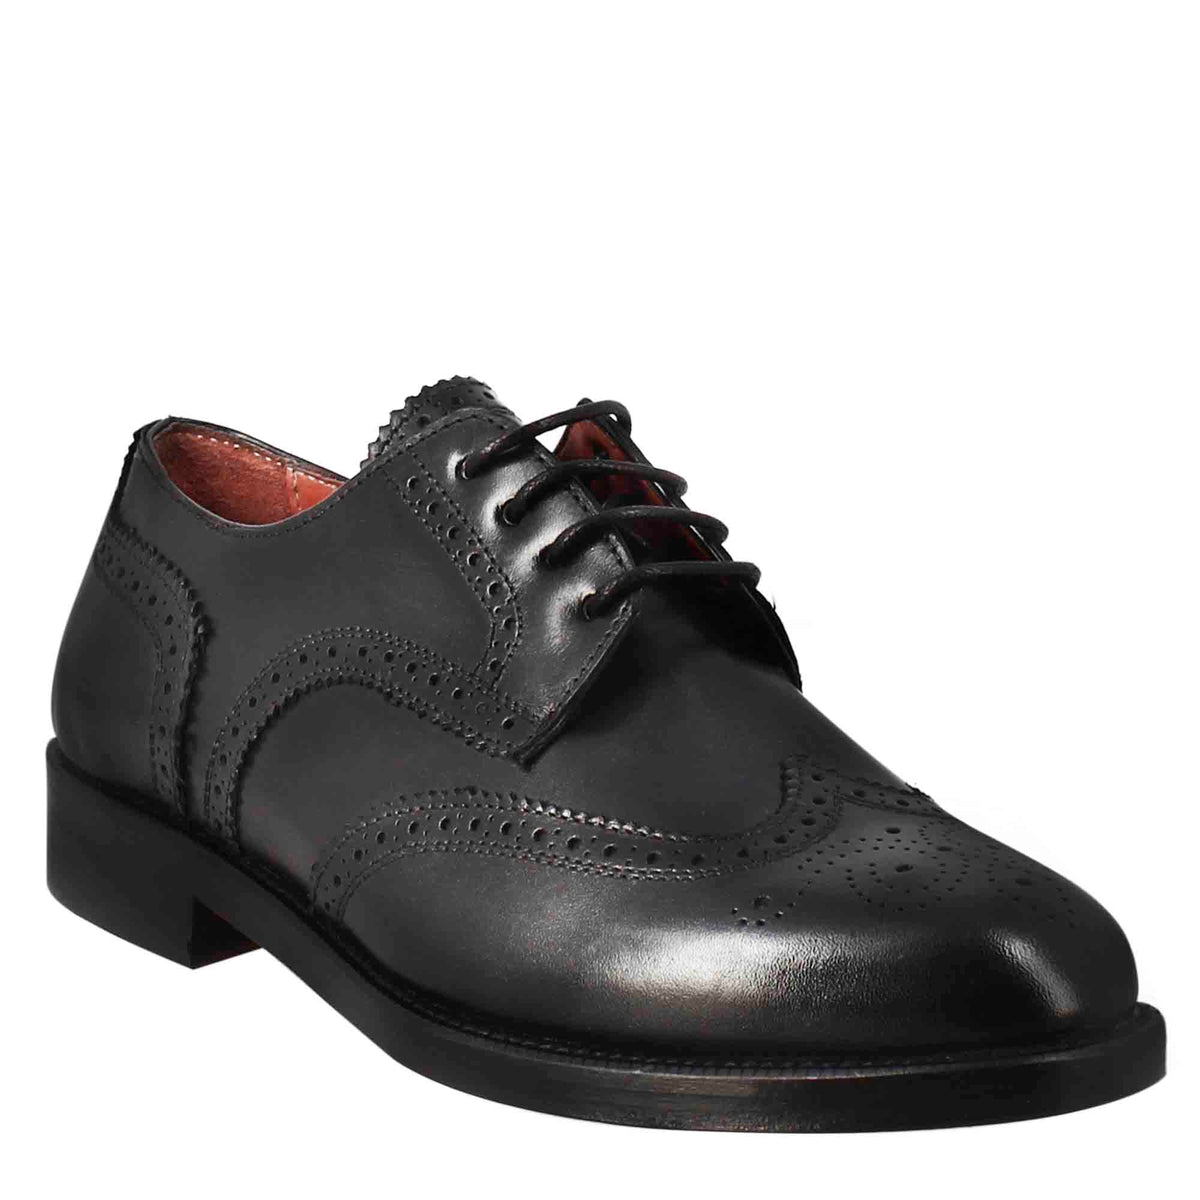 Women's derby with brogue effect in black leather